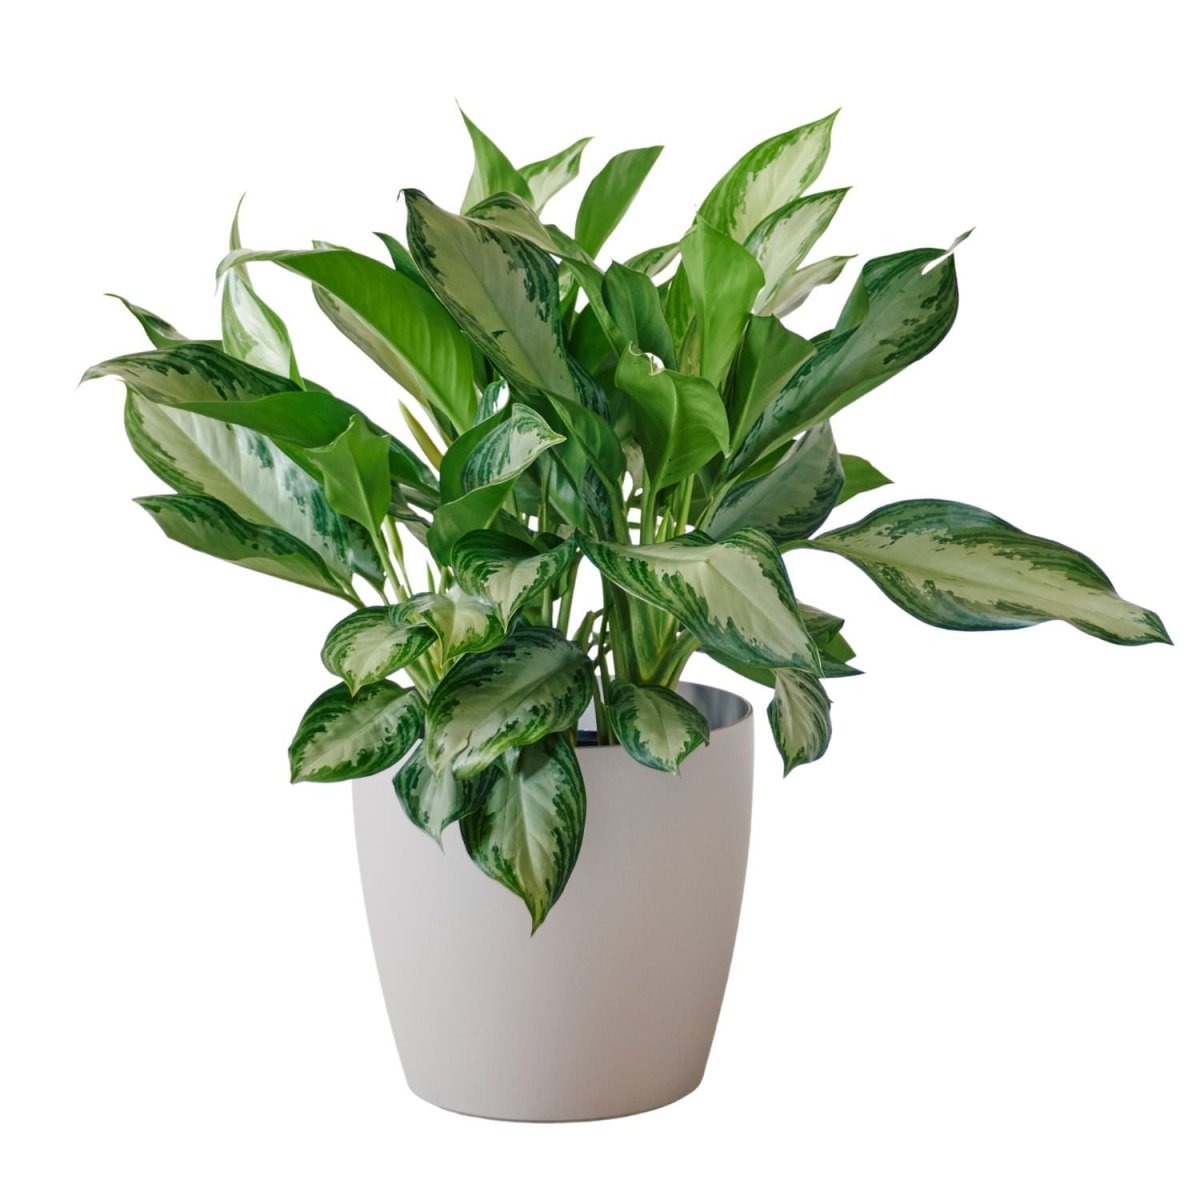 Aglaonema Potted In Lechuza Classico Trend Planter - Sand Brown - My City Plants